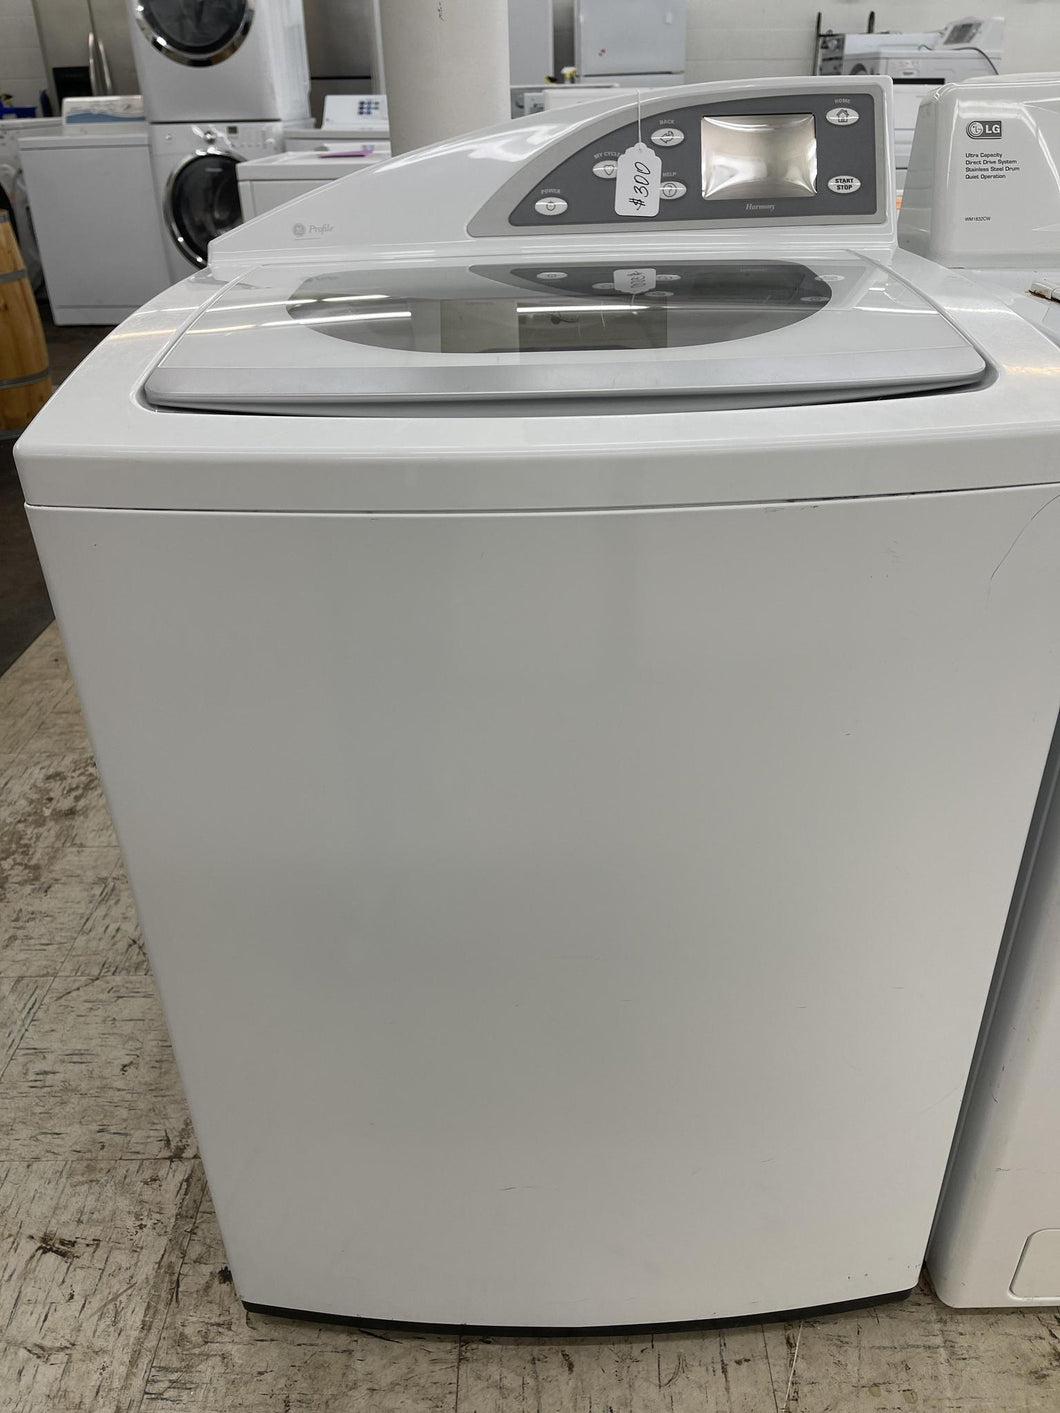 GE Washer - 3394